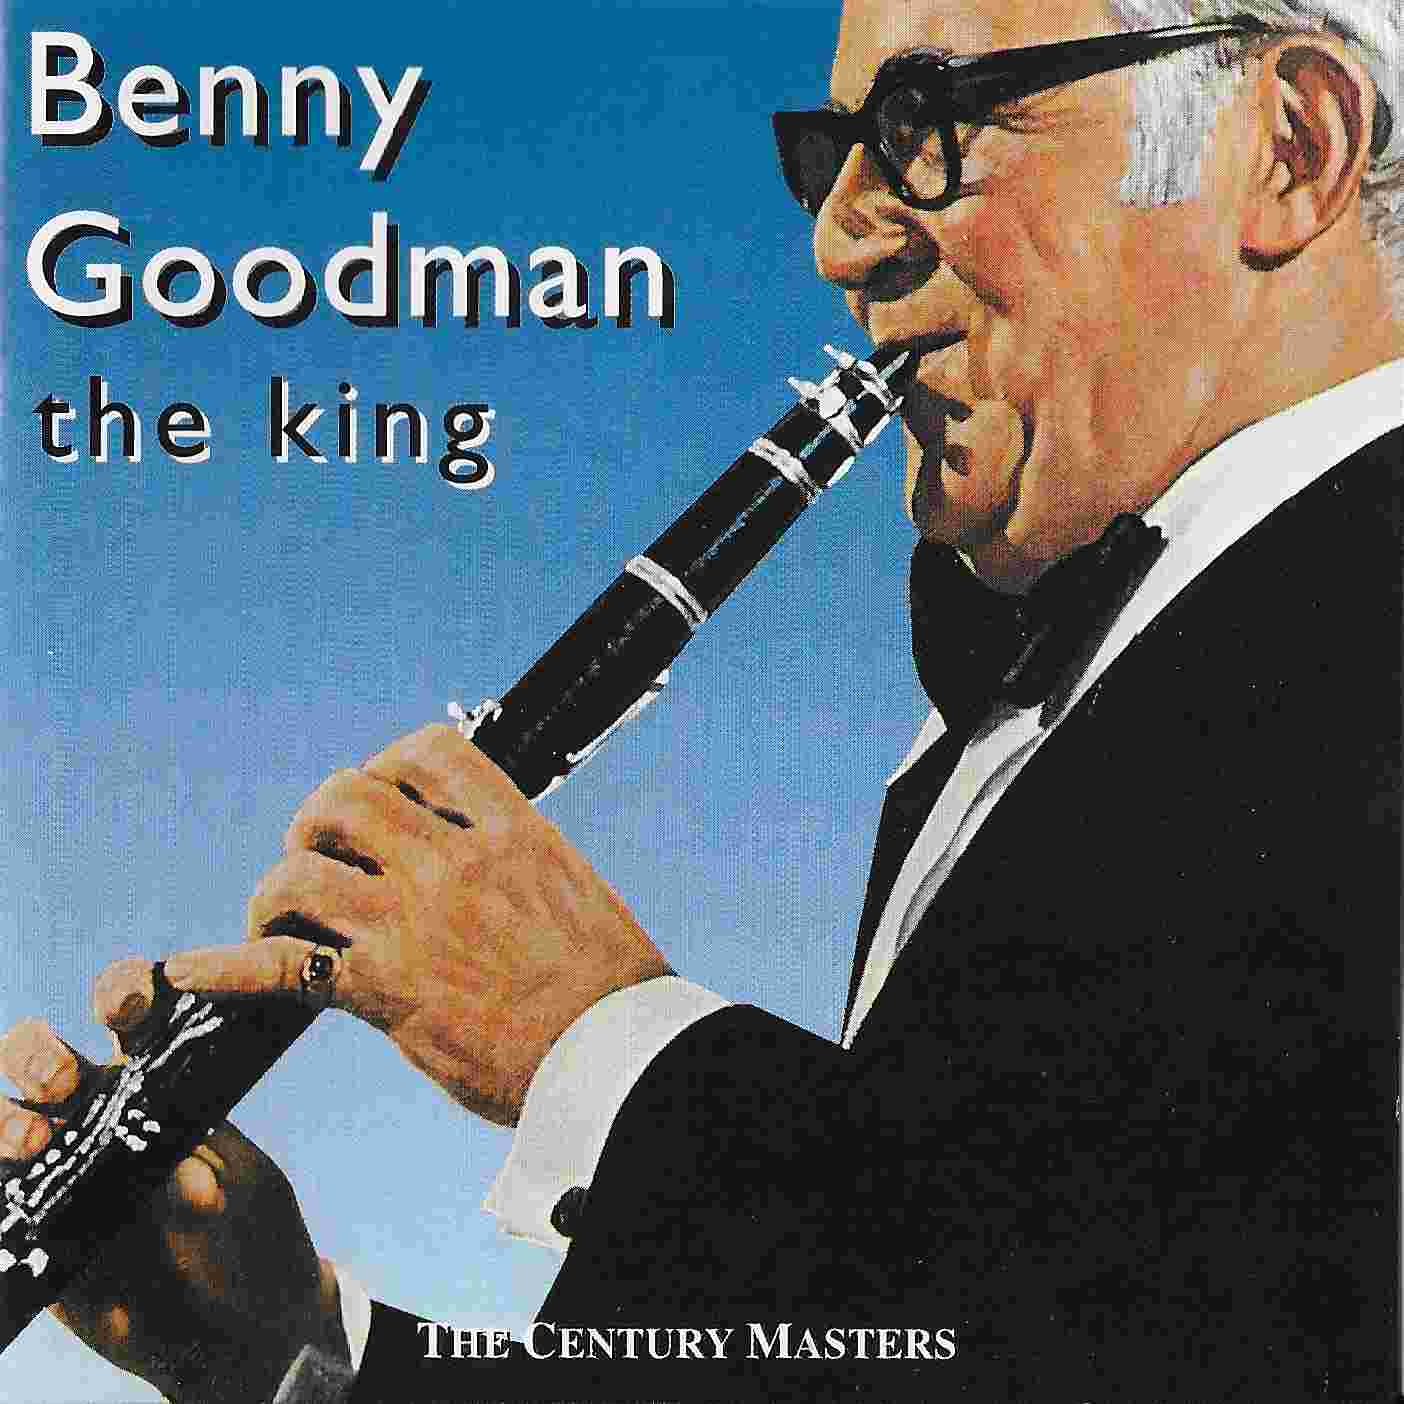 Picture of CJCD 835 The Century Catalogue - The king by artist Benny Goodman from the BBC cds - Records and Tapes library